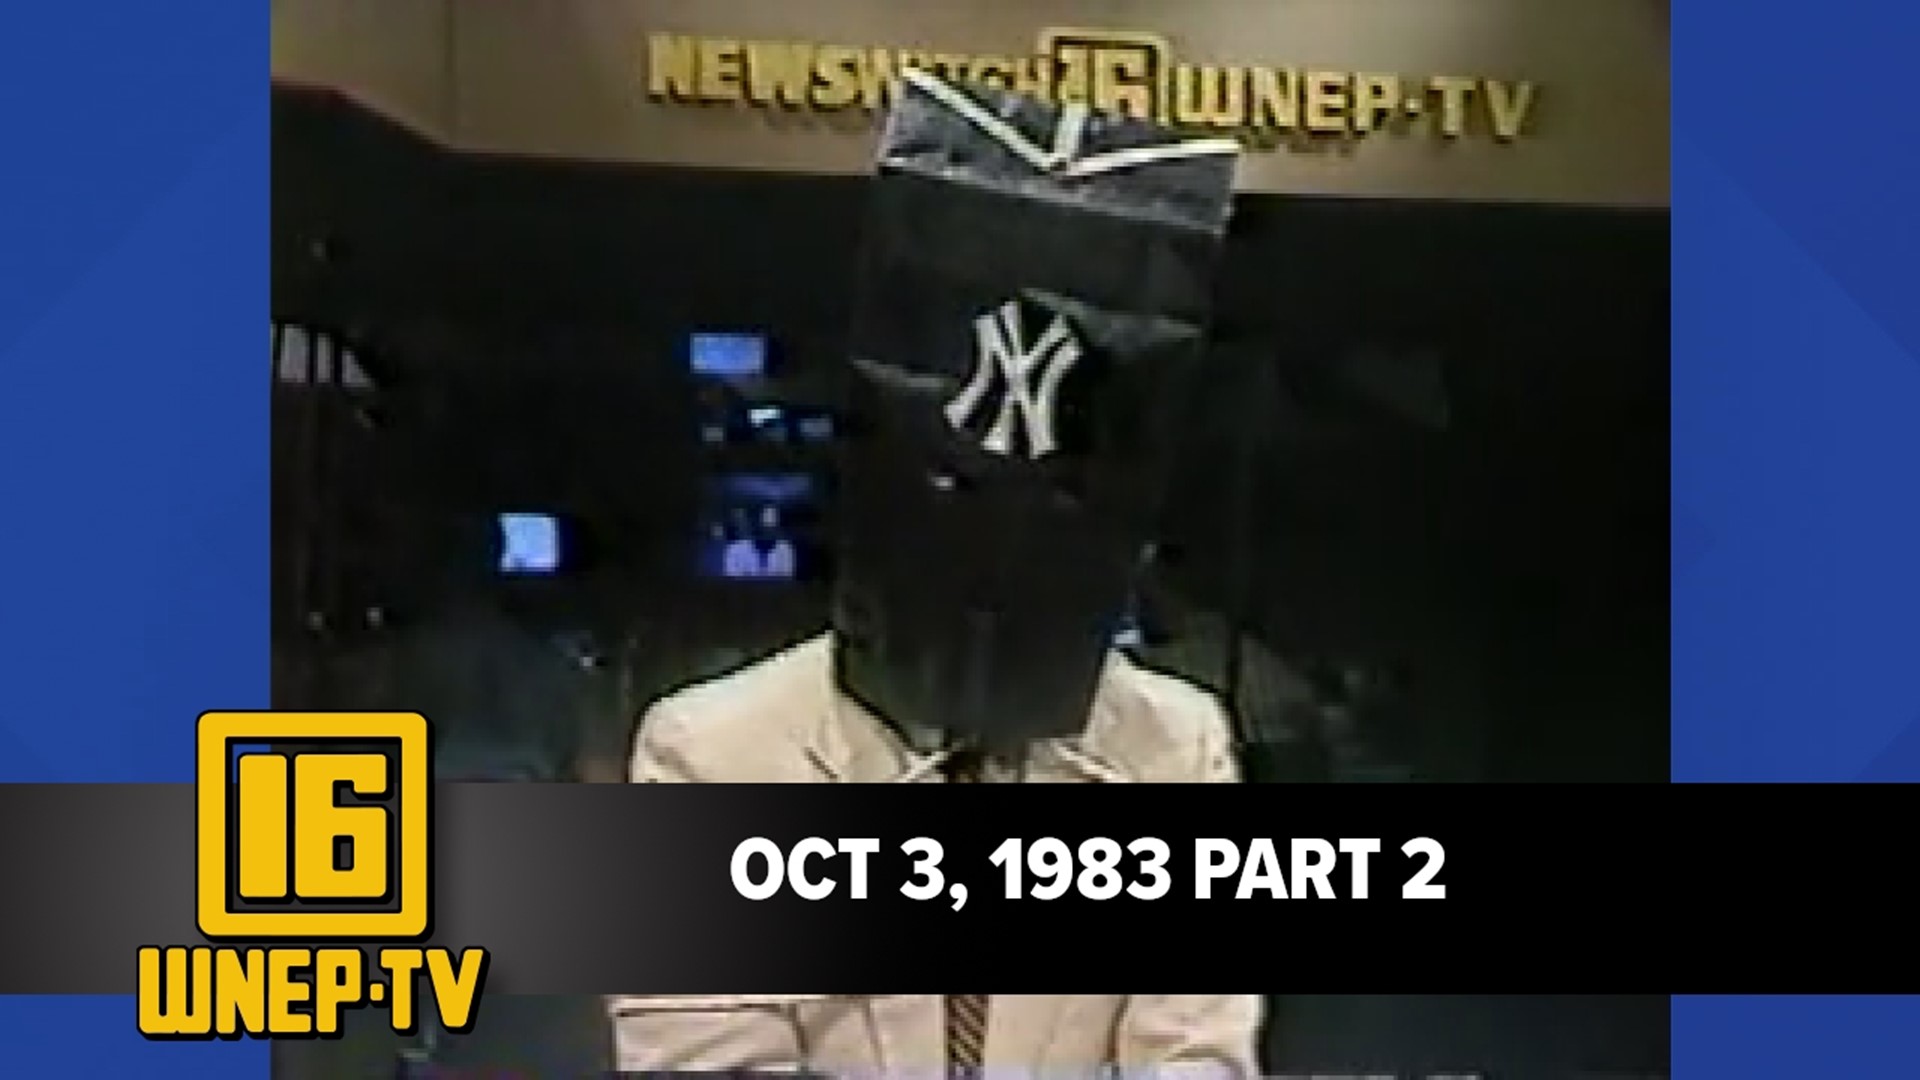 Join Karen Harch and Nolan Johannes for curated stories from October 3, 1983.